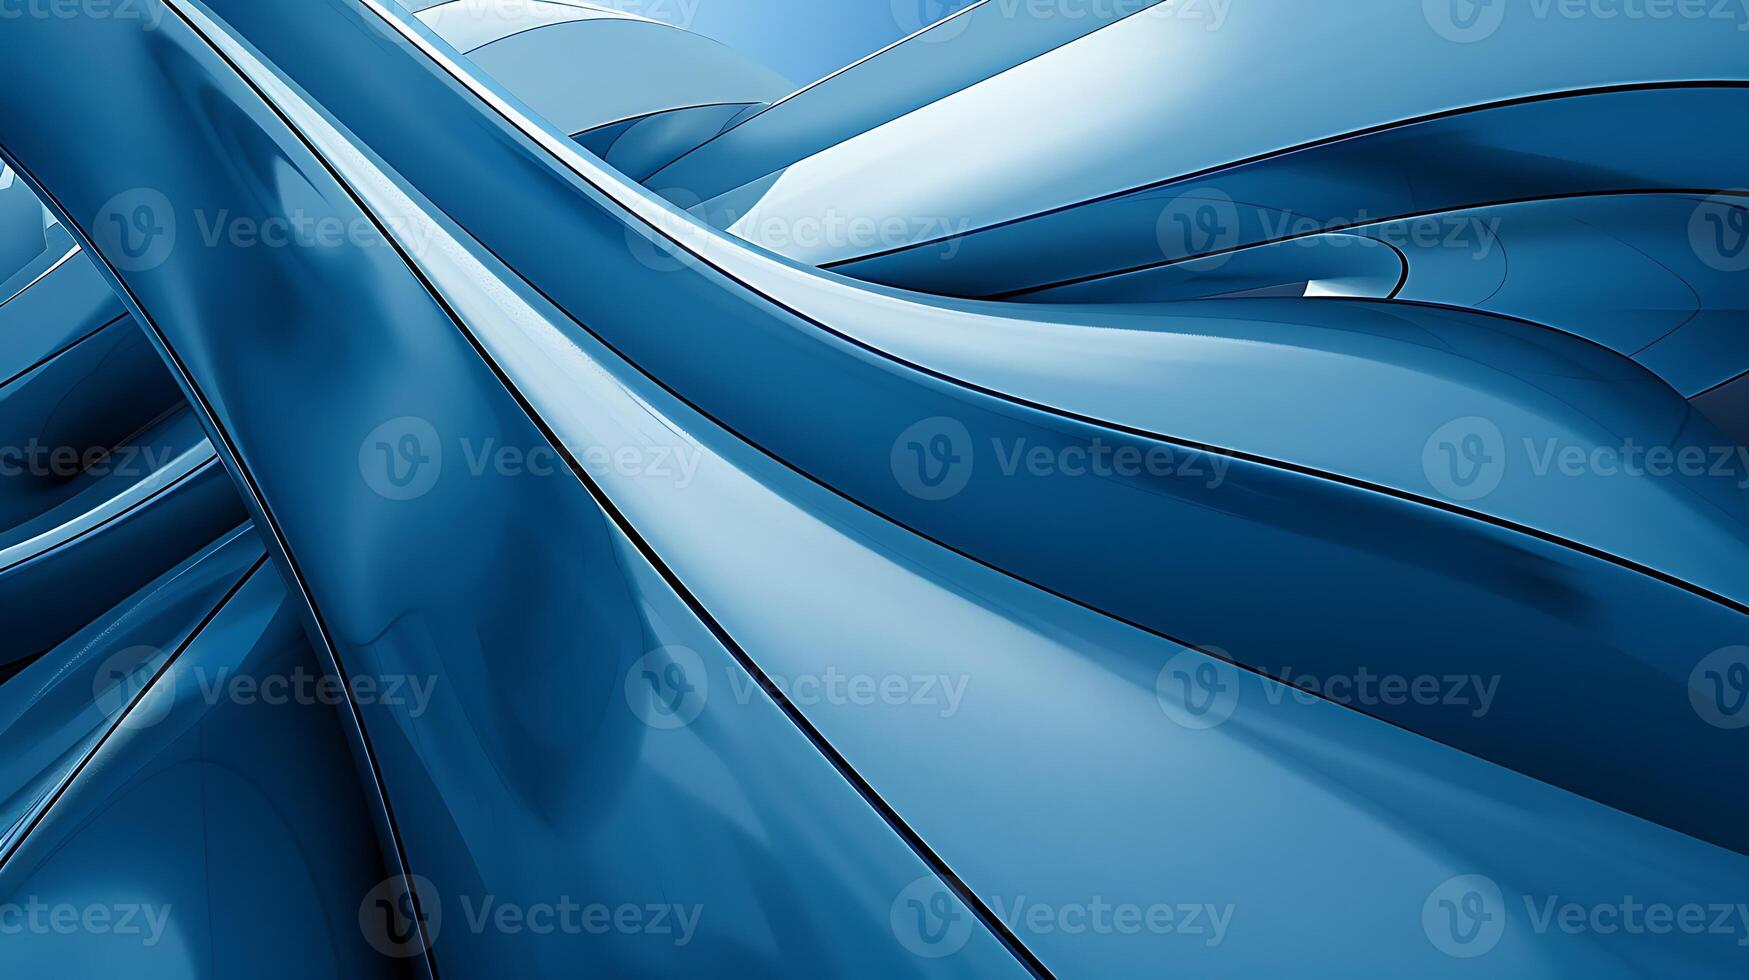 The blue background is curved, in the style of precisionist style photo